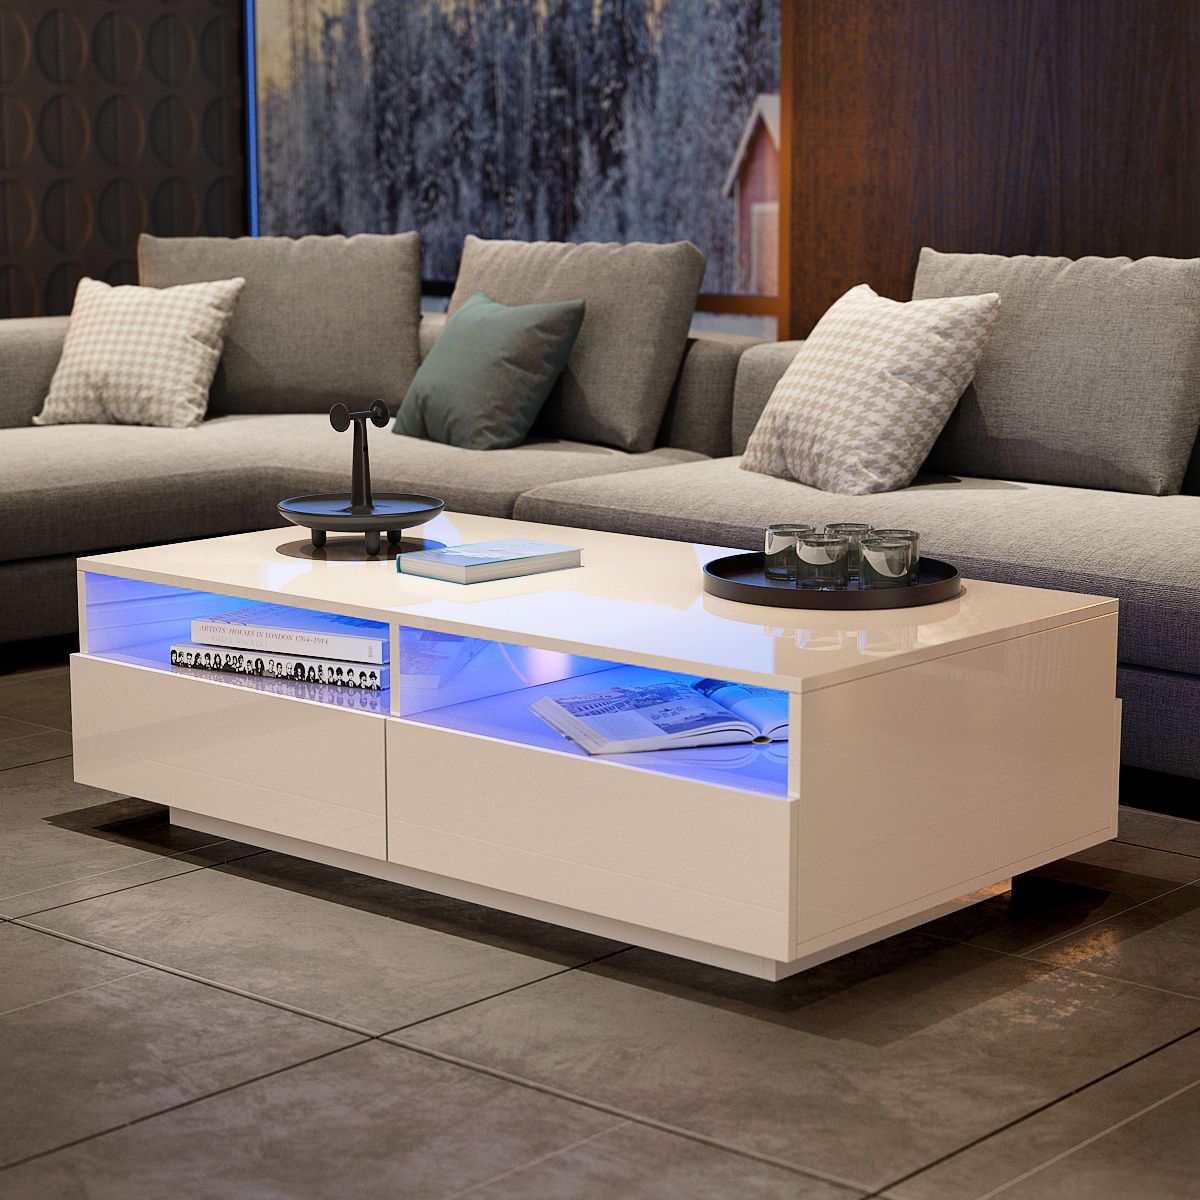 White High Gloss Coffee Table With Led Lights : High Gloss White Coffee Pertaining To Coffee Tables With Drawers And Led Lights (View 2 of 15)